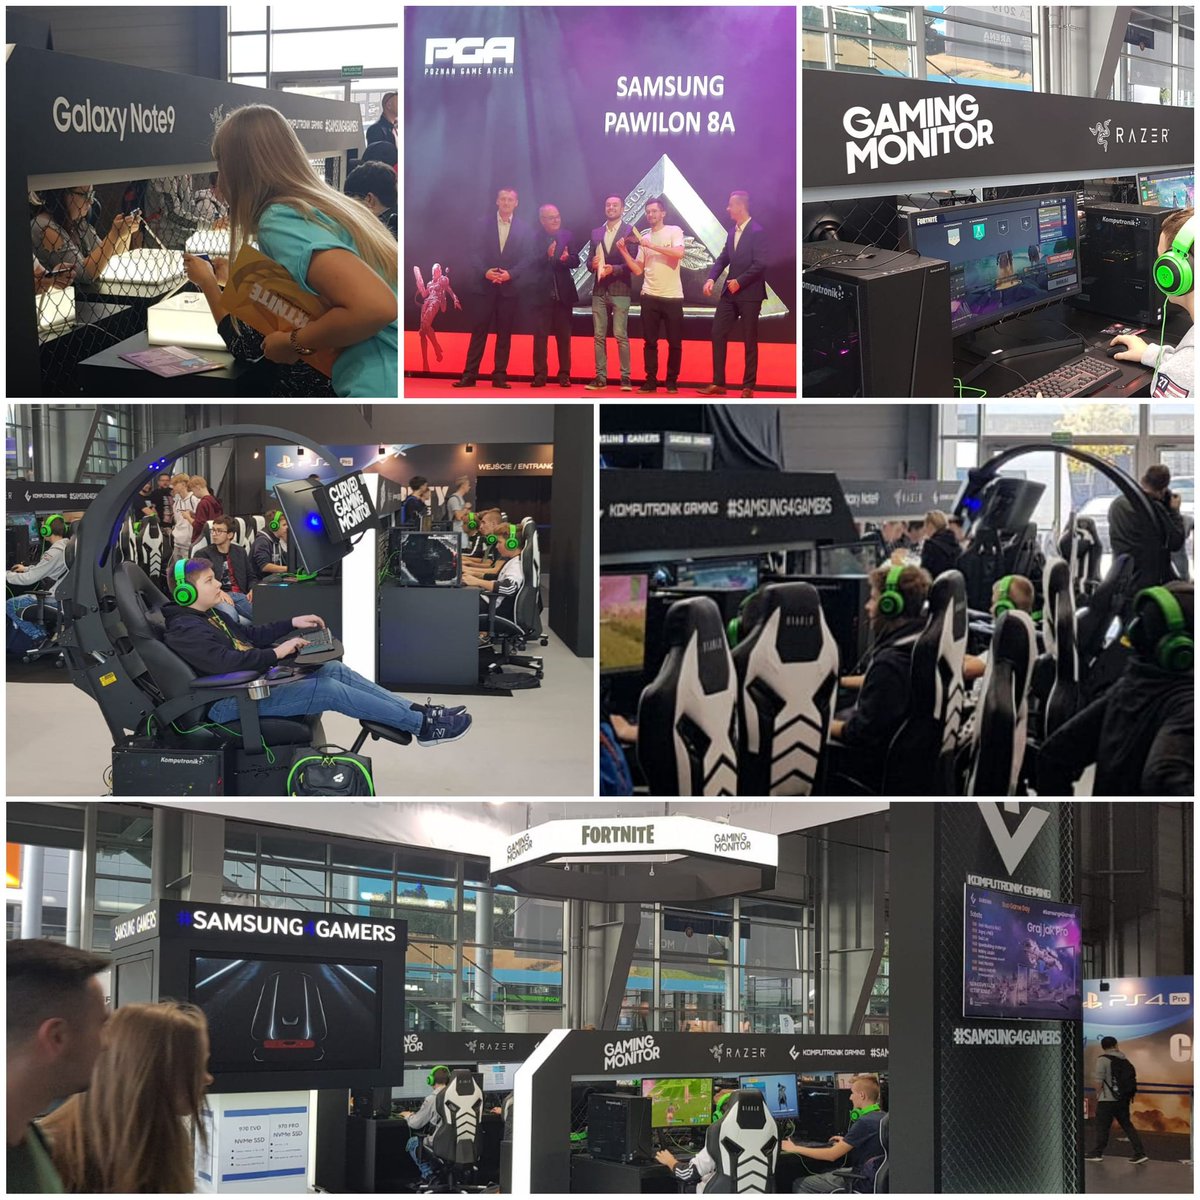 Great showcase of our Polish team!! Best booth at #PosnanGameArena and cool Samsung Gaming products at the Samsung/Komputronik stand. #UltimateGamingChair #Diablo #C27HG70 #Samsung4Gamers